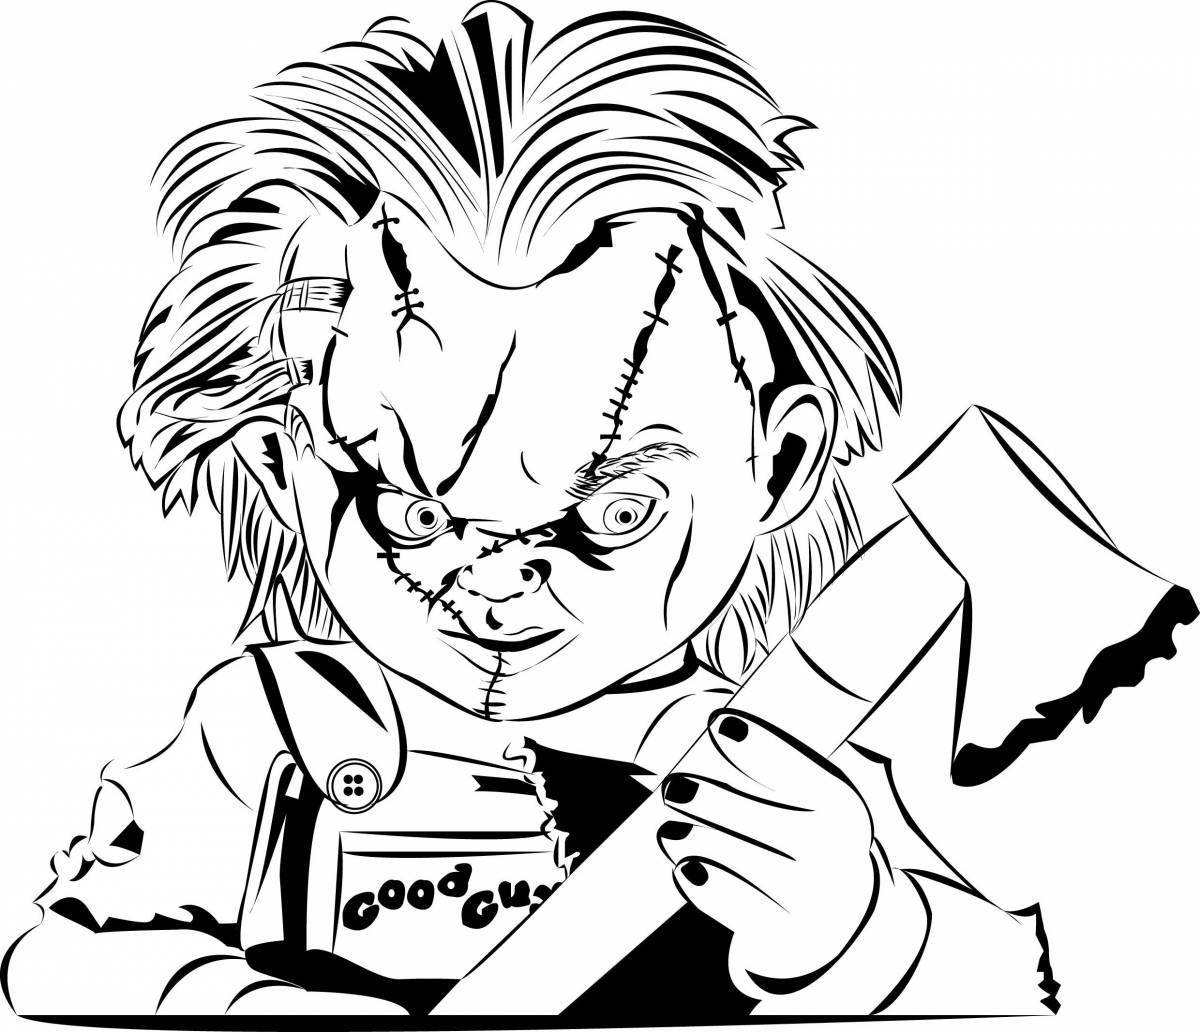 Surreal chucky doll coloring page